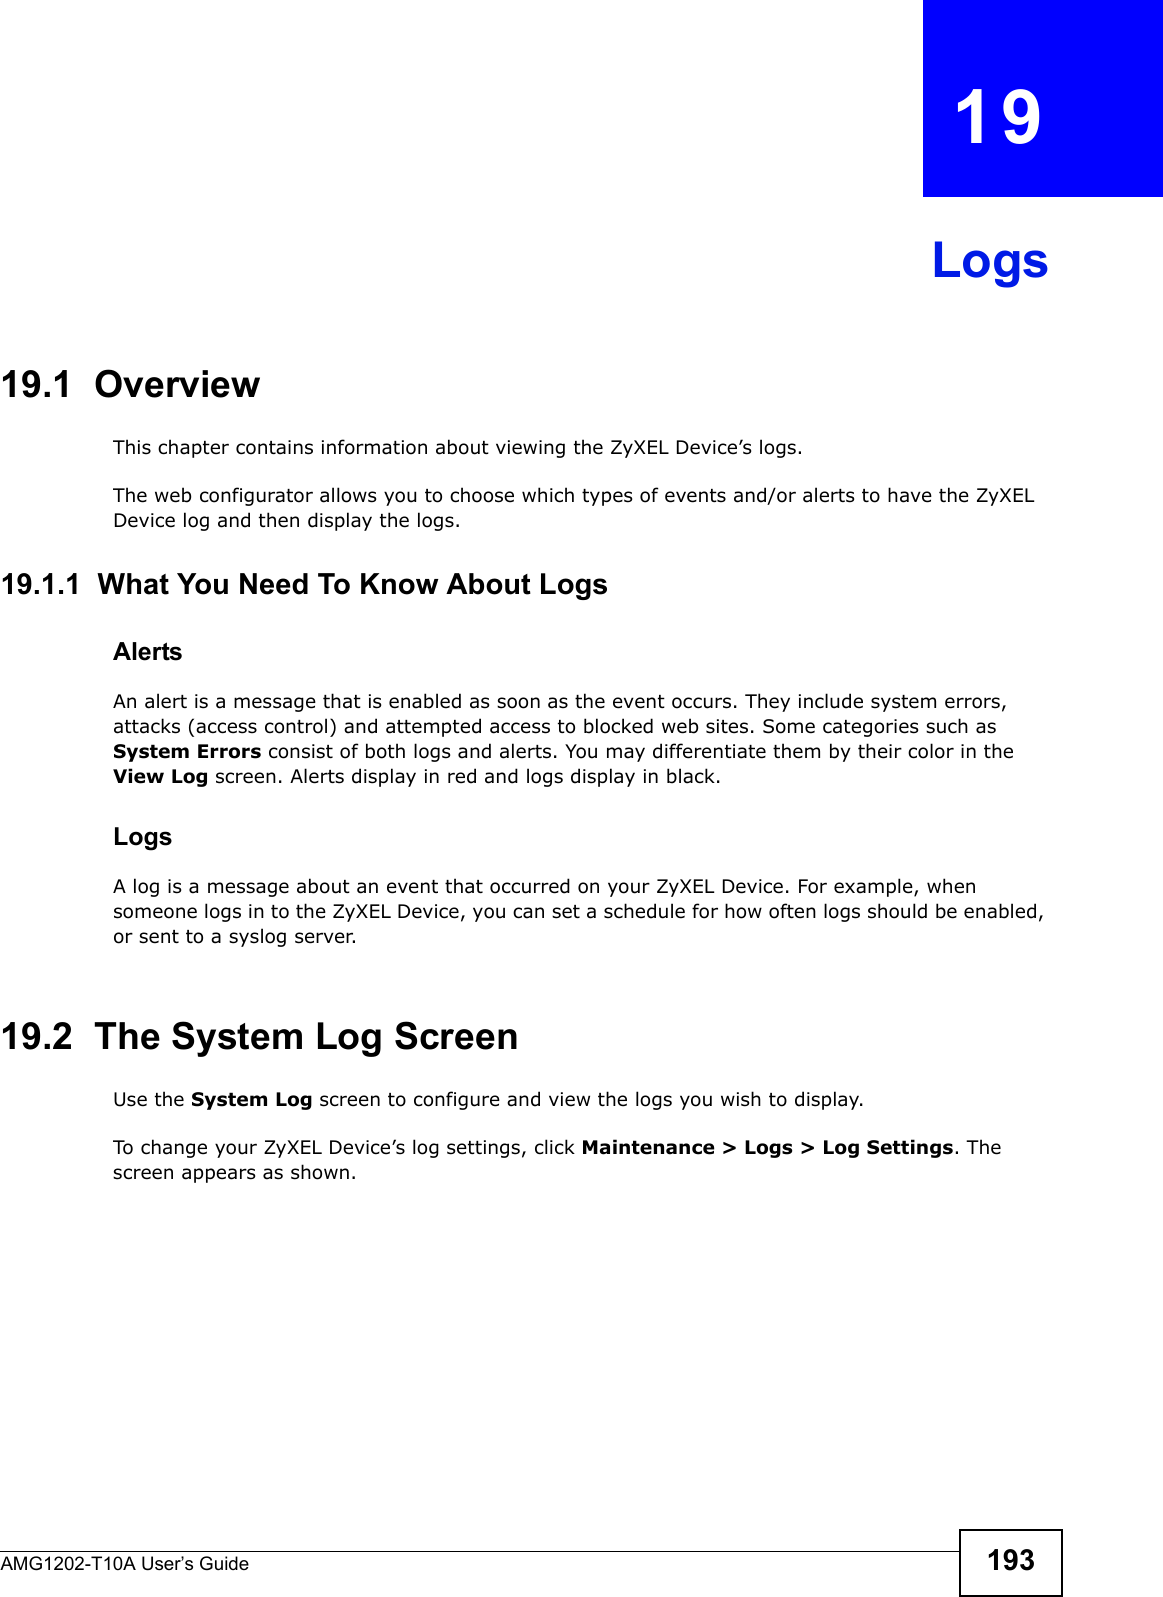 AMG1202-T10A User’s Guide 193CHAPTER   19Logs19.1  OverviewThis chapter contains information about viewing the ZyXEL Device’s logs.The web configurator allows you to choose which types of events and/or alerts to have the ZyXEL Device log and then display the logs. 19.1.1  What You Need To Know About LogsAlertsAn alert is a message that is enabled as soon as the event occurs. They include system errors, attacks (access control) and attempted access to blocked web sites. Some categories such as System Errors consist of both logs and alerts. You may differentiate them by their color in the View Log screen. Alerts display in red and logs display in black.LogsA log is a message about an event that occurred on your ZyXEL Device. For example, when someone logs in to the ZyXEL Device, you can set a schedule for how often logs should be enabled, or sent to a syslog server.19.2  The System Log ScreenUse the System Log screen to configure and view the logs you wish to display.To change your ZyXEL Device’s log settings, click Maintenance &gt; Logs &gt; Log Settings. The screen appears as shown.